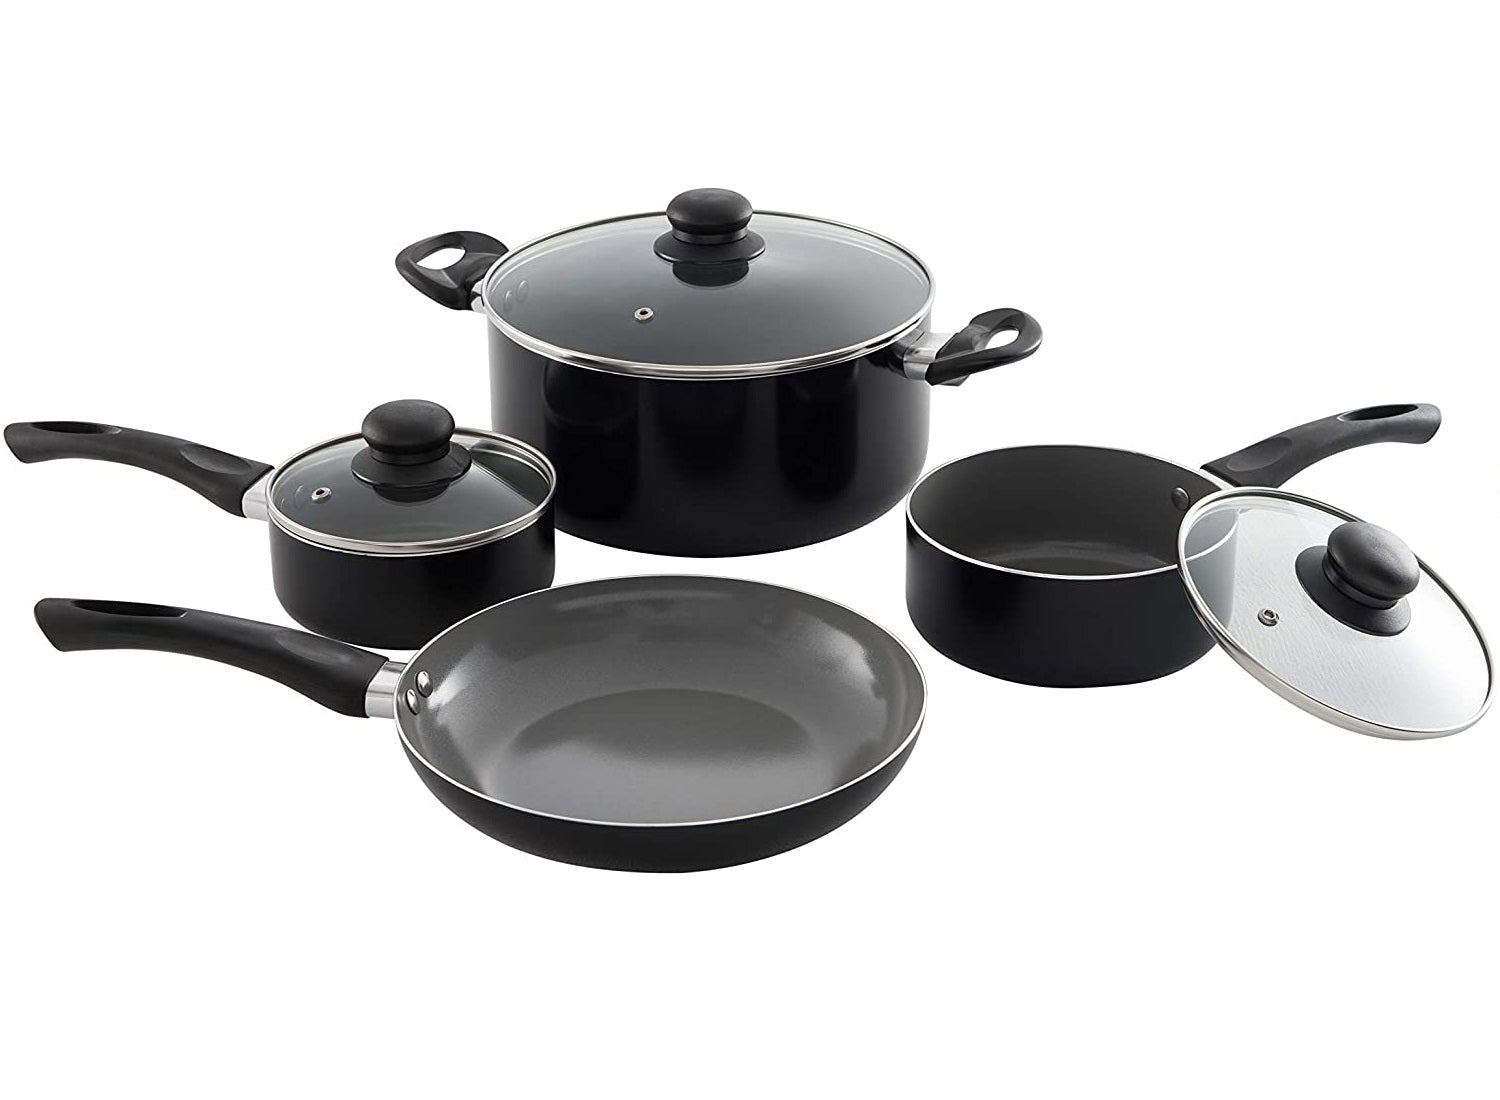 7 Piece Cookware Set Nonstick Coated Kitchen Pots And Pans Home